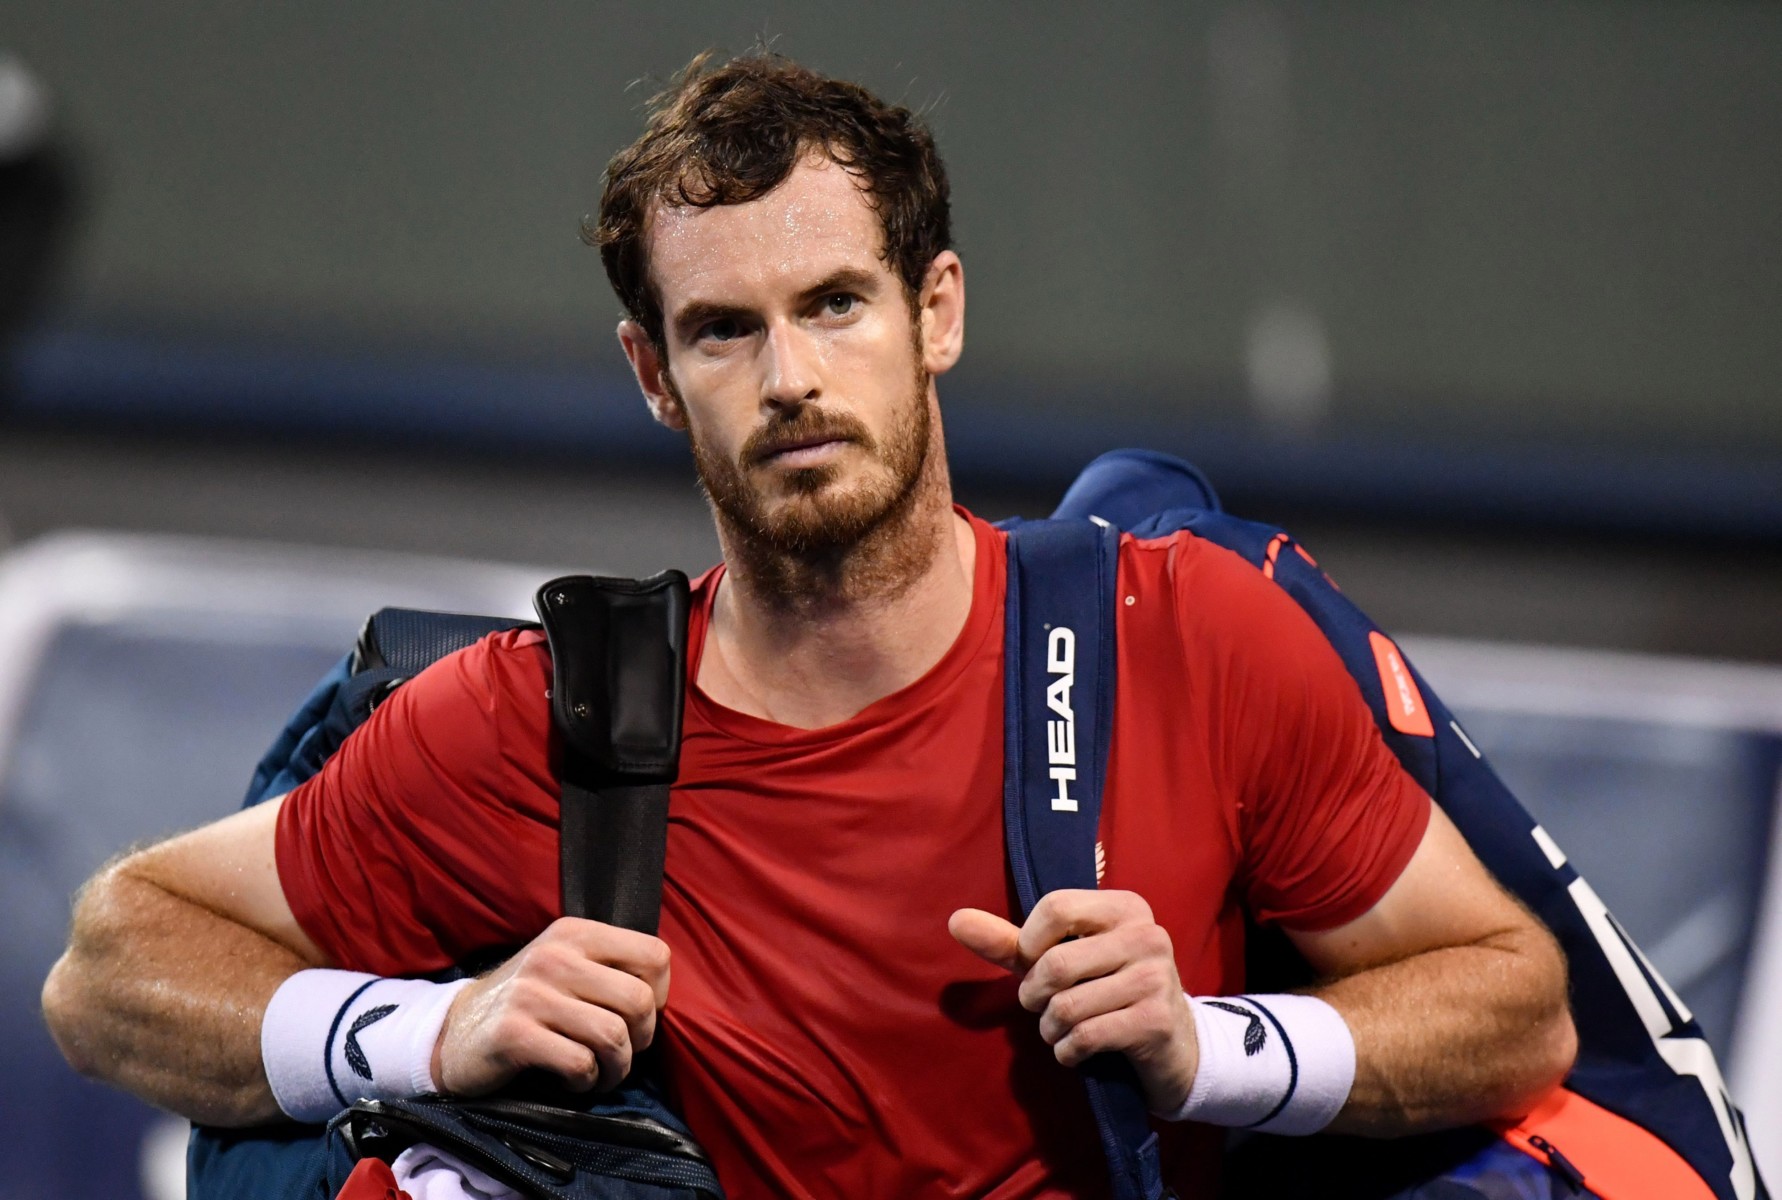 Andy Murray reckons he may have had coronavirus but did not get tested